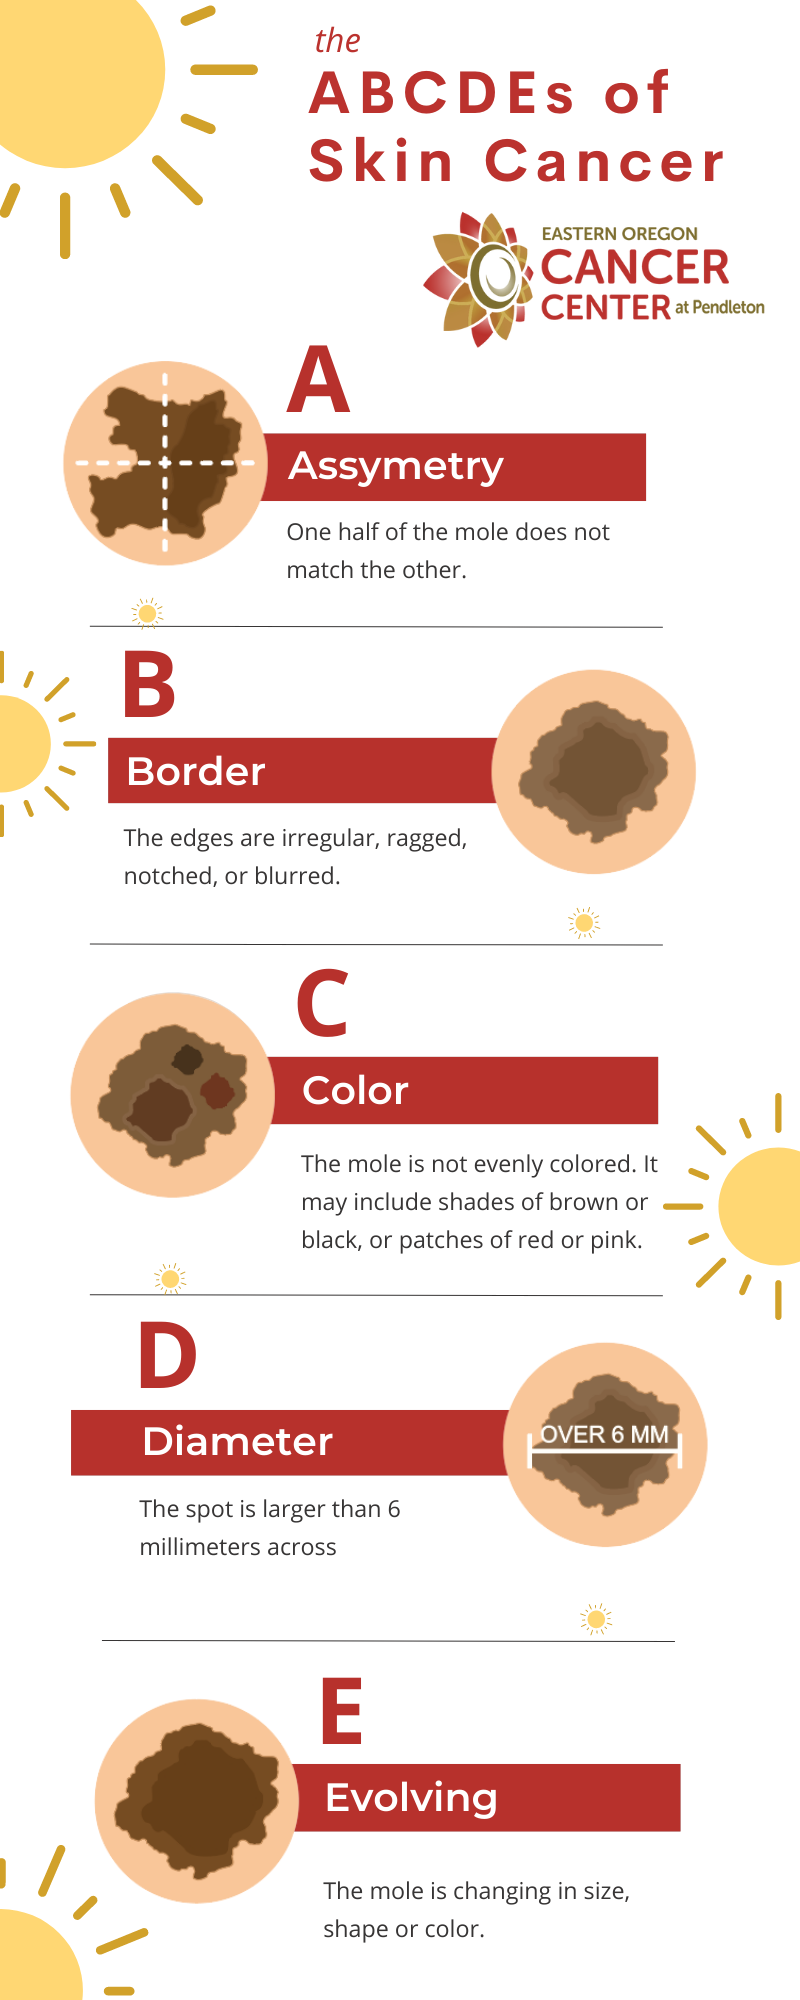 The ABCDEs of Skin Cancer